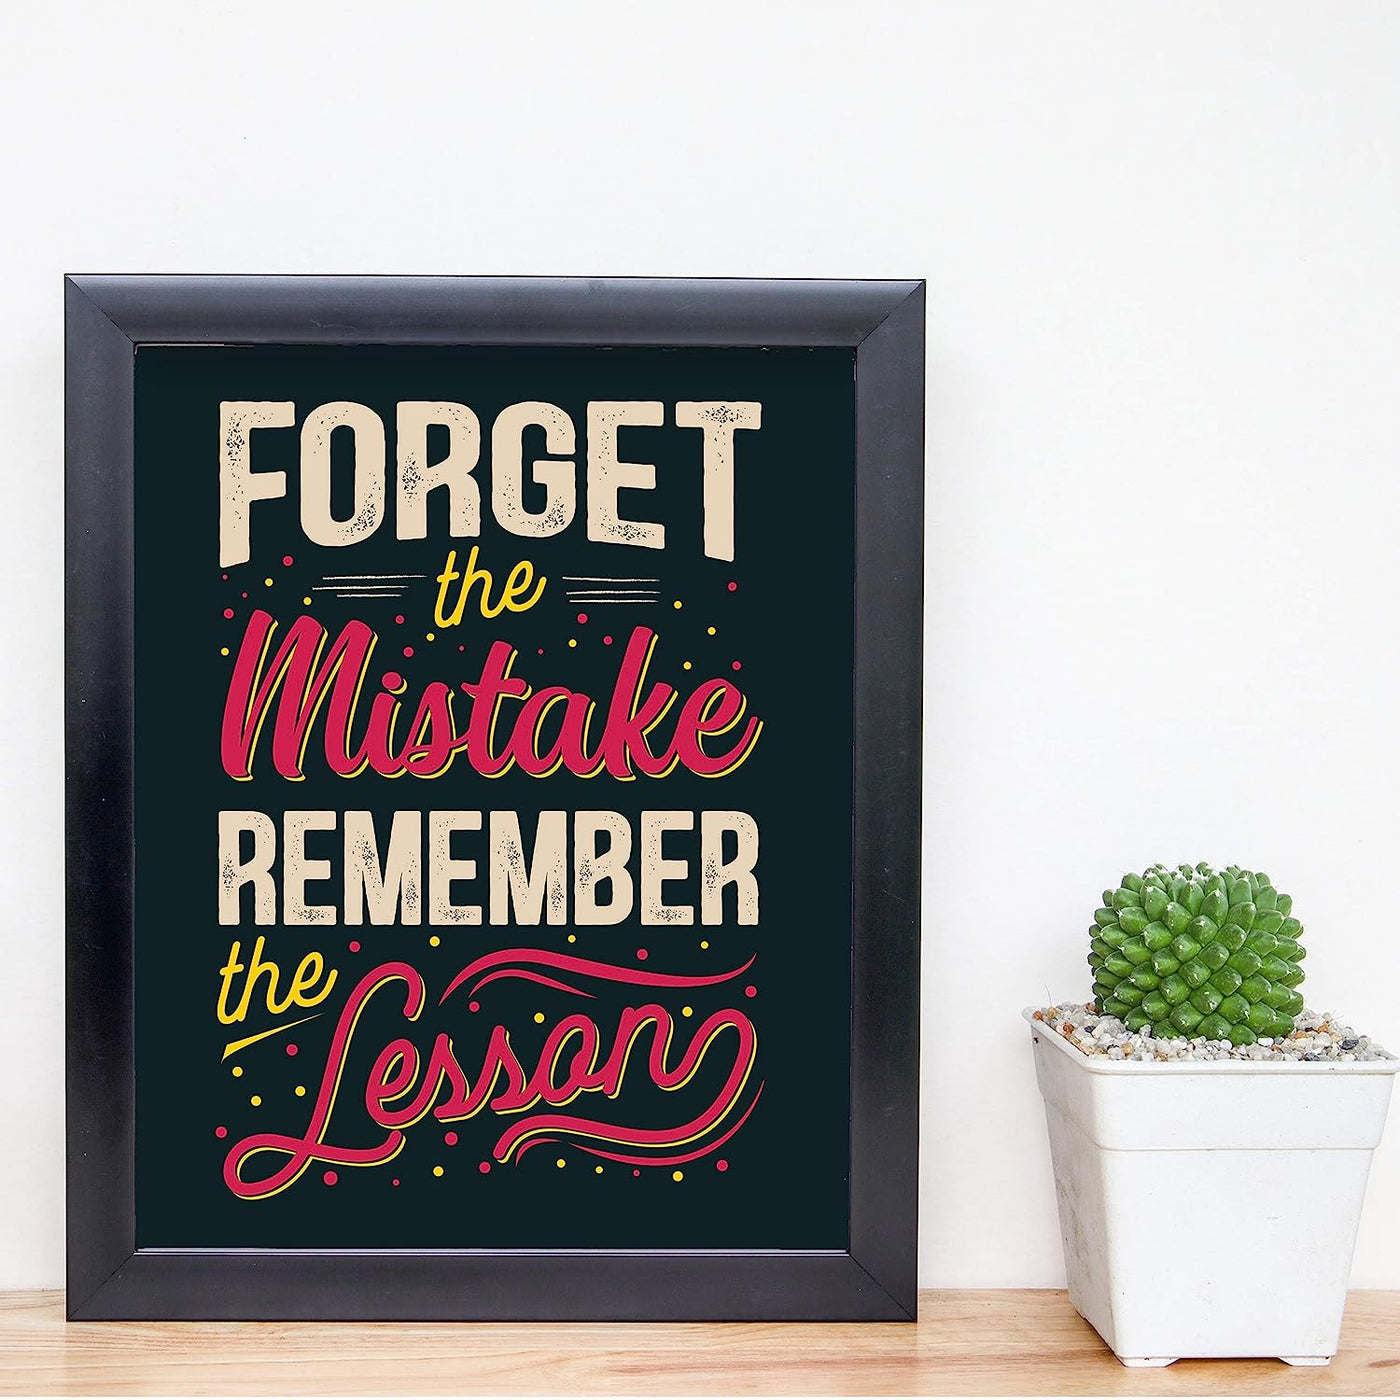 Forget the Mistake-Remember the Lesson Inspirational Quotes Wall Sign -8 x 10" Typographic Art Print-Ready to Frame. Motivational Decor for Home-Office-School. Perfect Classroom Sign! Great Advice!